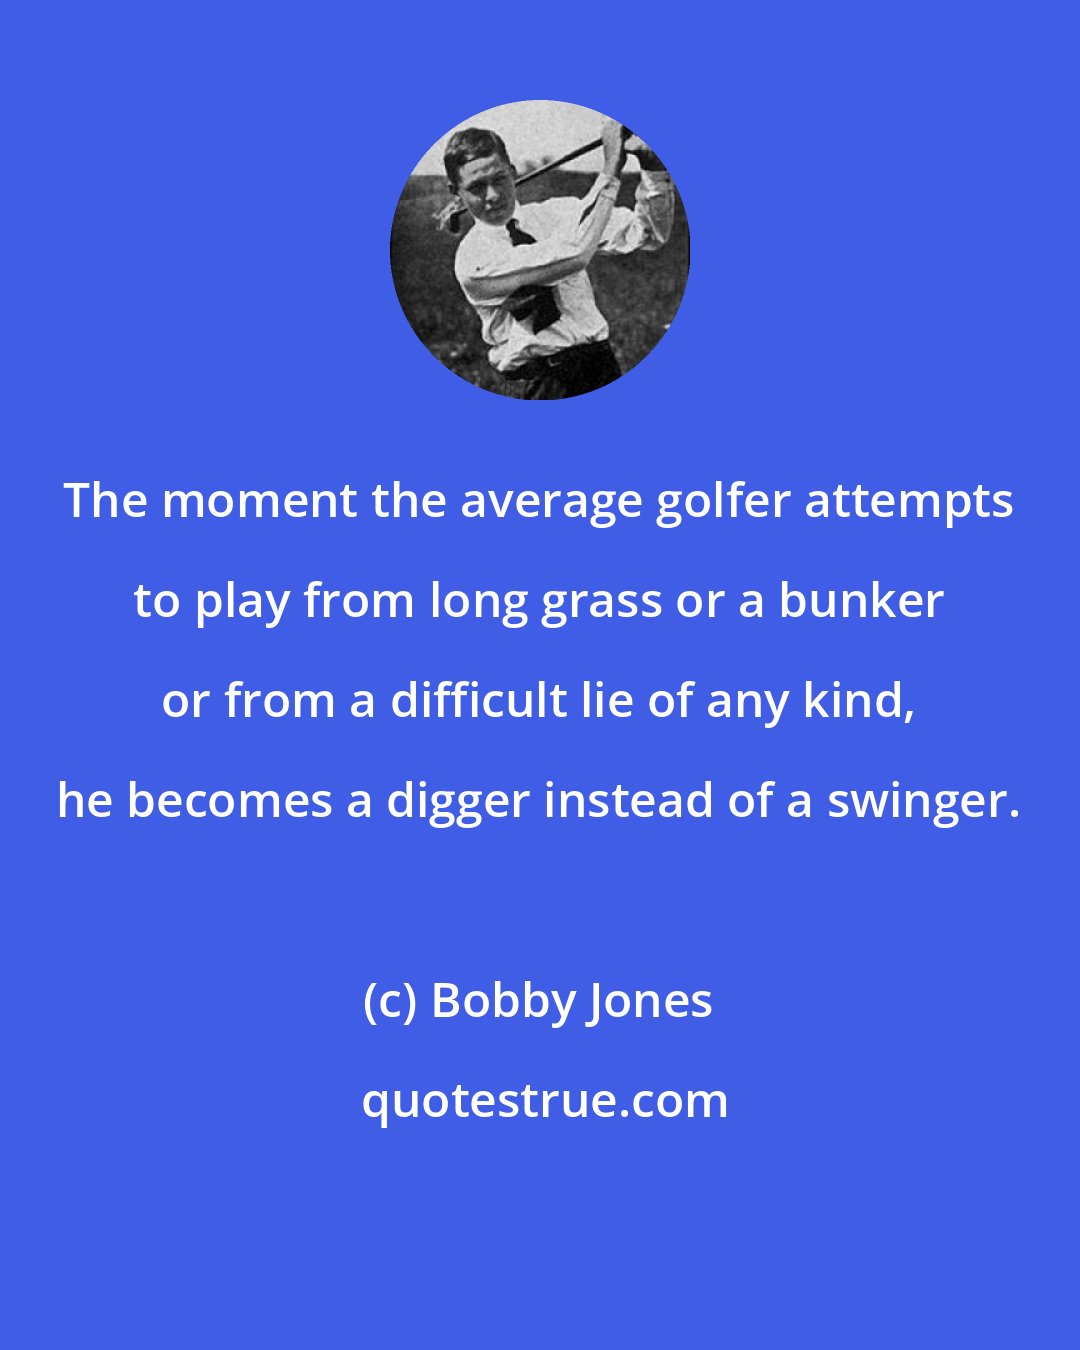 Bobby Jones: The moment the average golfer attempts to play from long grass or a bunker or from a difficult lie of any kind, he becomes a digger instead of a swinger.